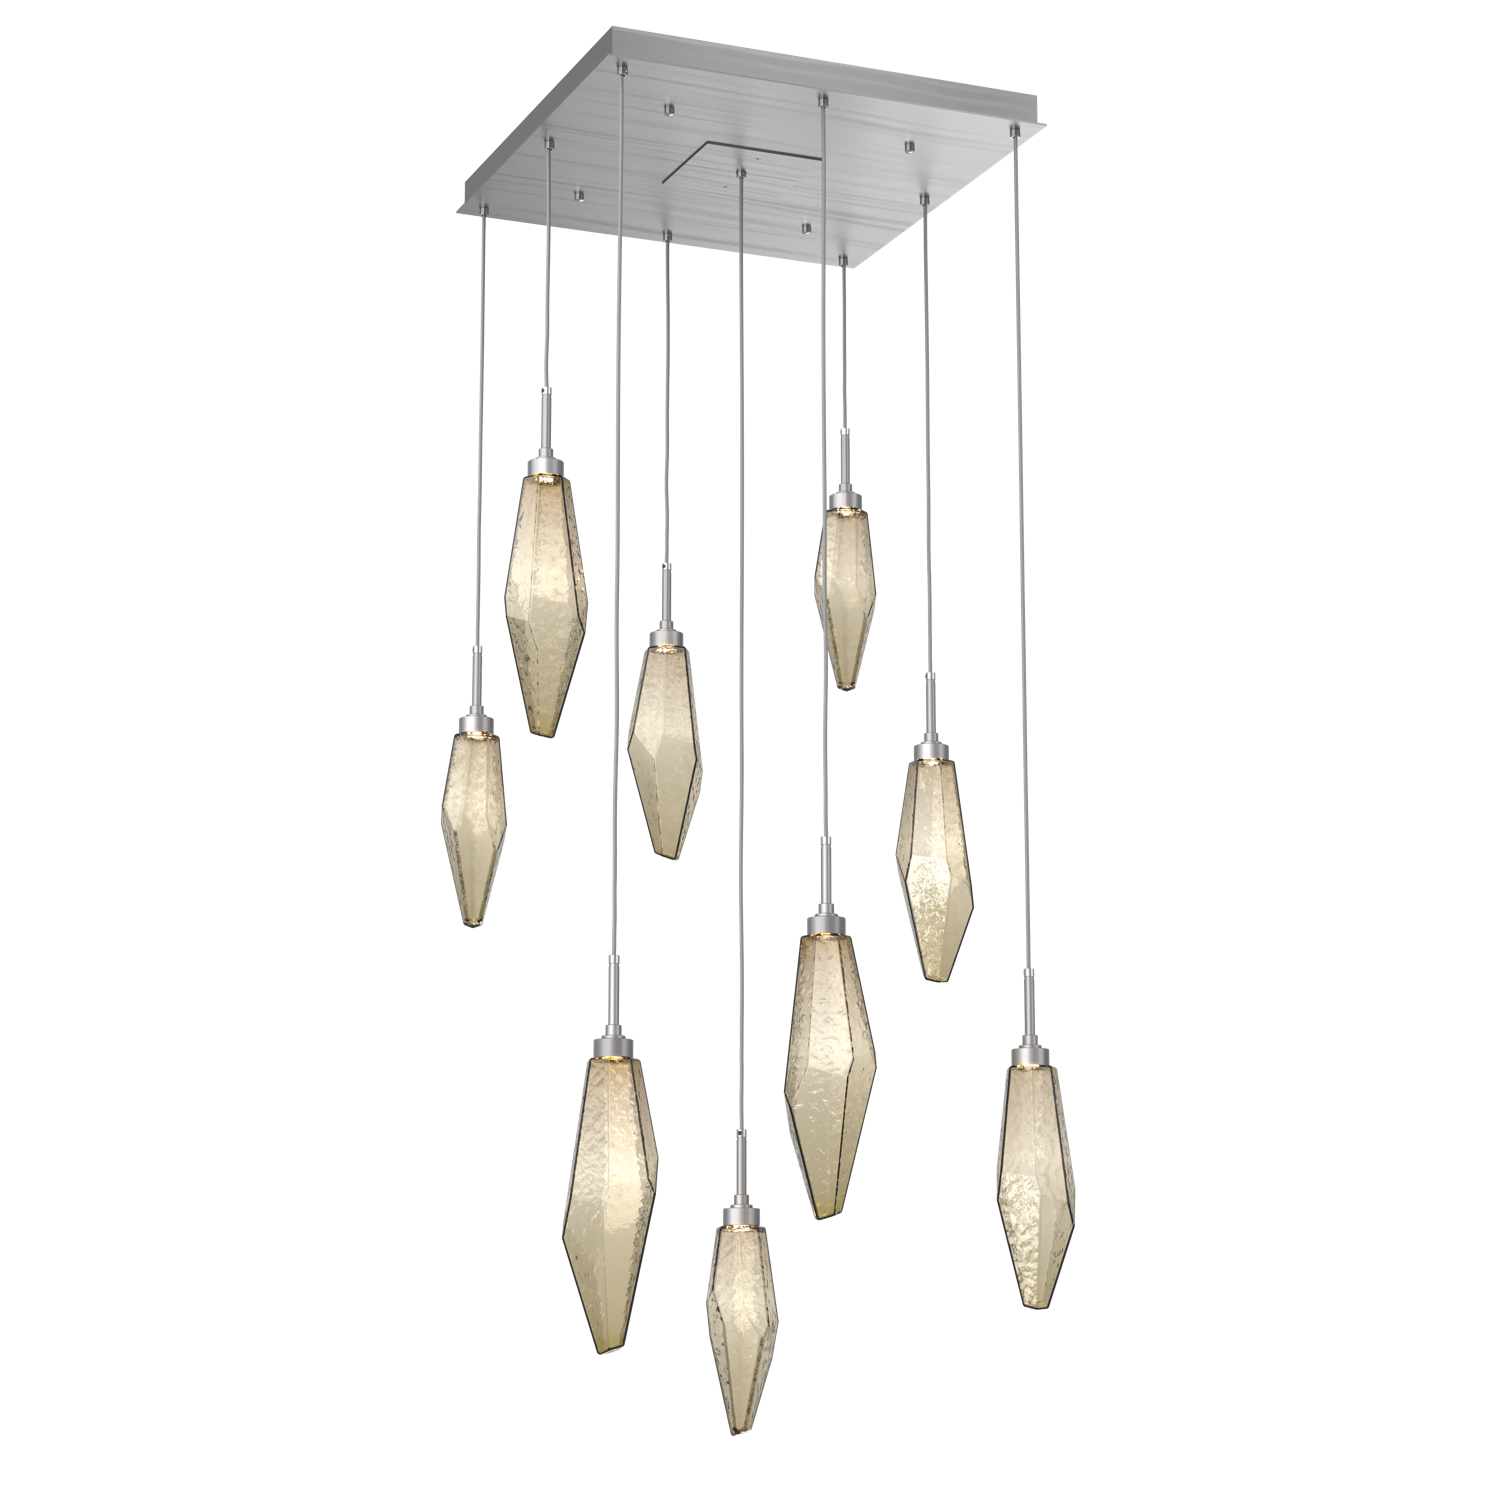 CHB0050-09-SN-CB-Hammerton-Studio-Rock-Crystal-9-light-square-pendant-chandelier-with-satin-nickel-finish-and-chilled-bronze-blown-glass-shades-and-LED-lamping